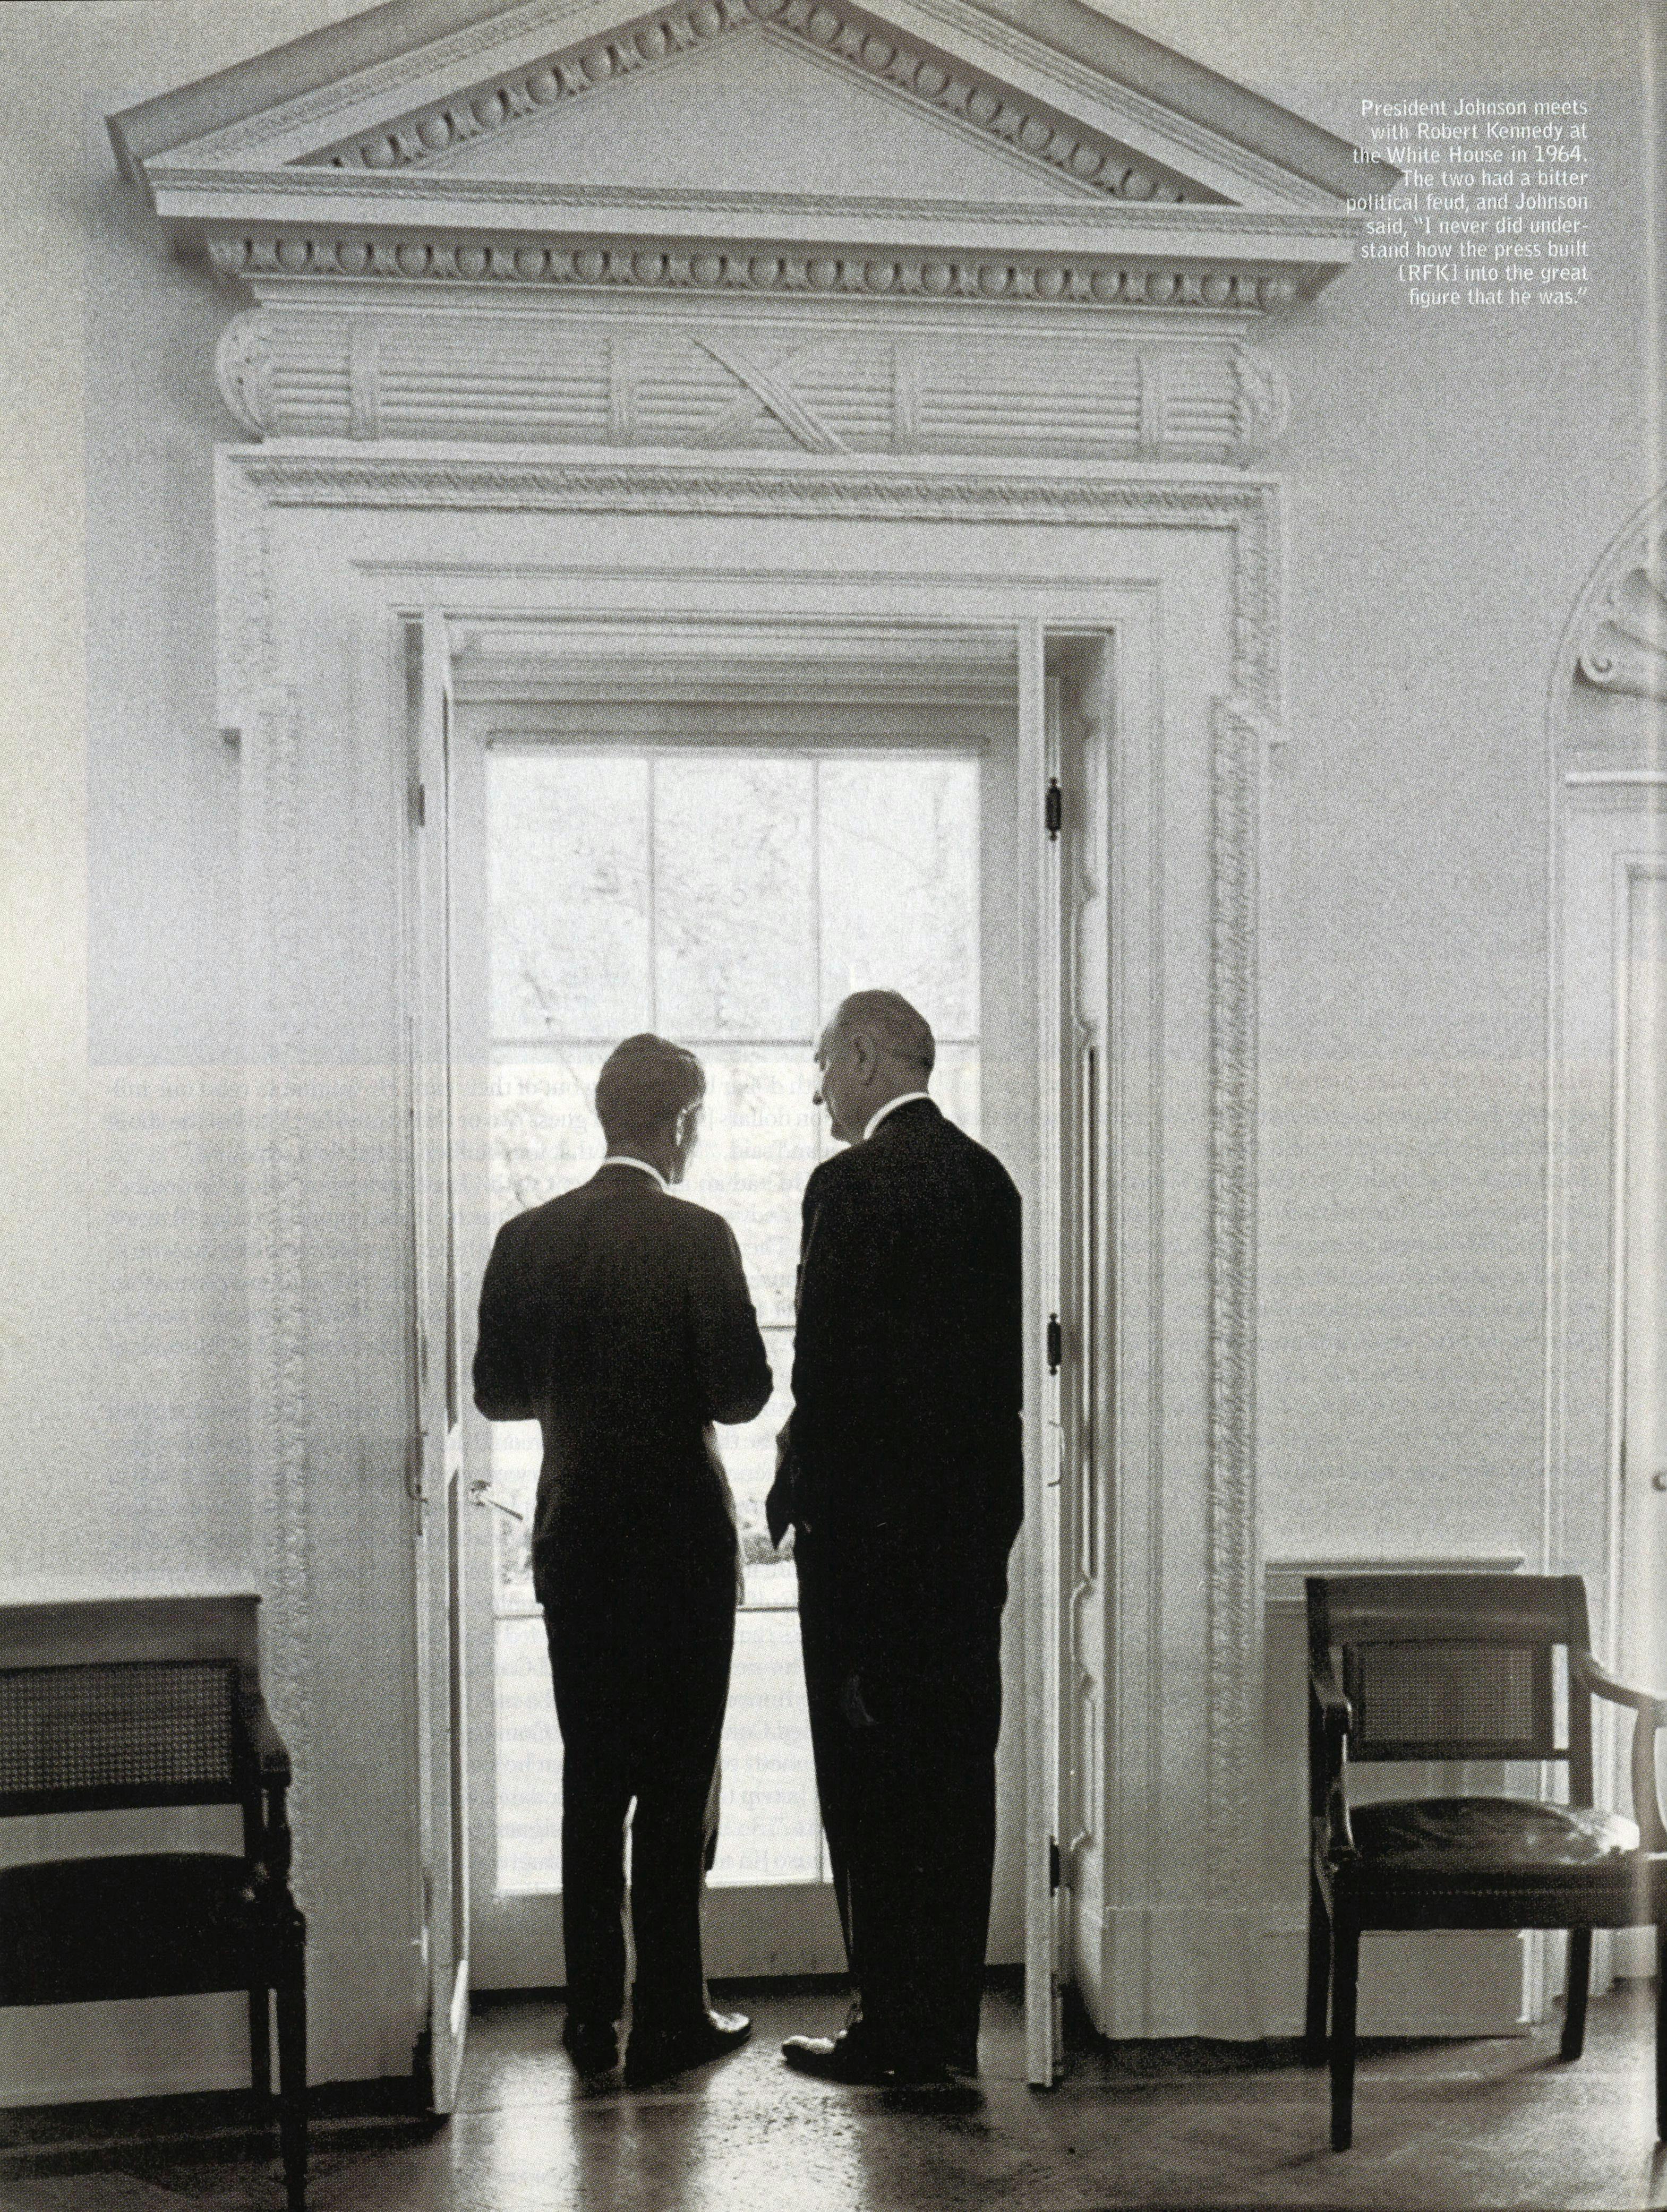 President Johnson meets with Robert Kennedy at the WHite House in 1964. The two had a bitter political feud, and Johnson said, "I never did understand how the press built [RFK] into the great figure that he was." 